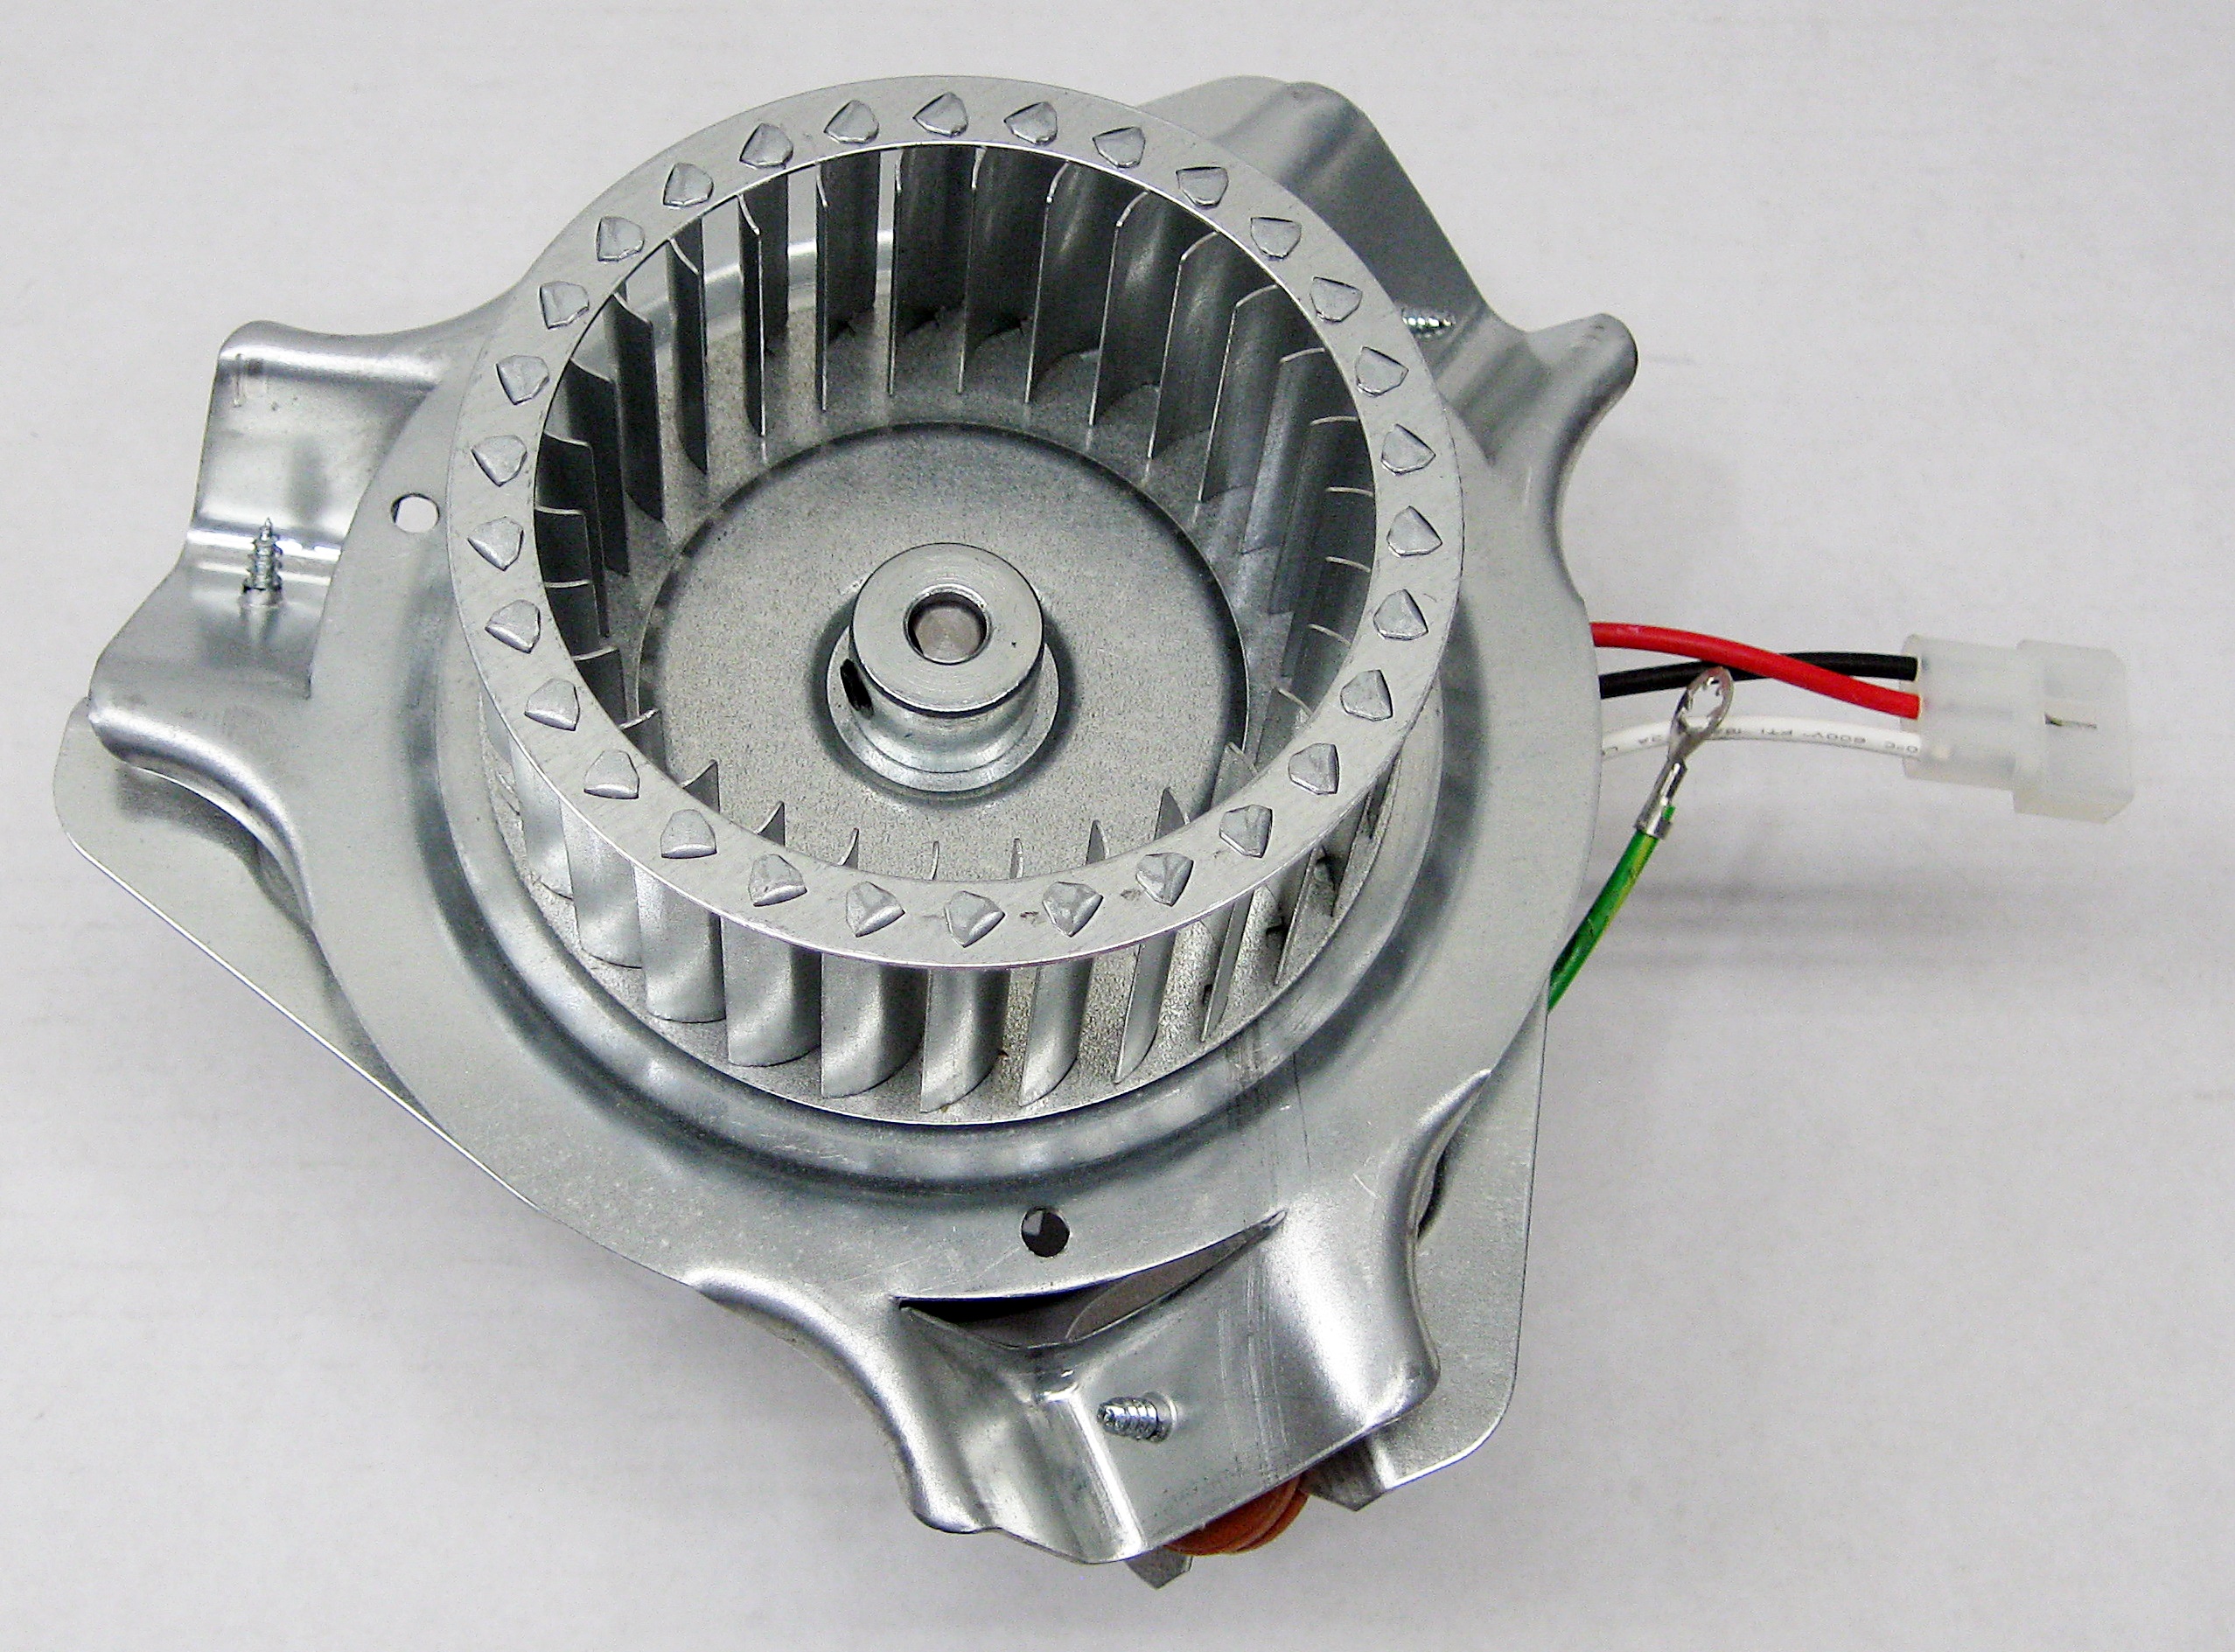 Packard 66762 Draft Inducer, 17/1.11W, Speed, 1.06/0.28 Amps, 3000 RPM, 115  Volts